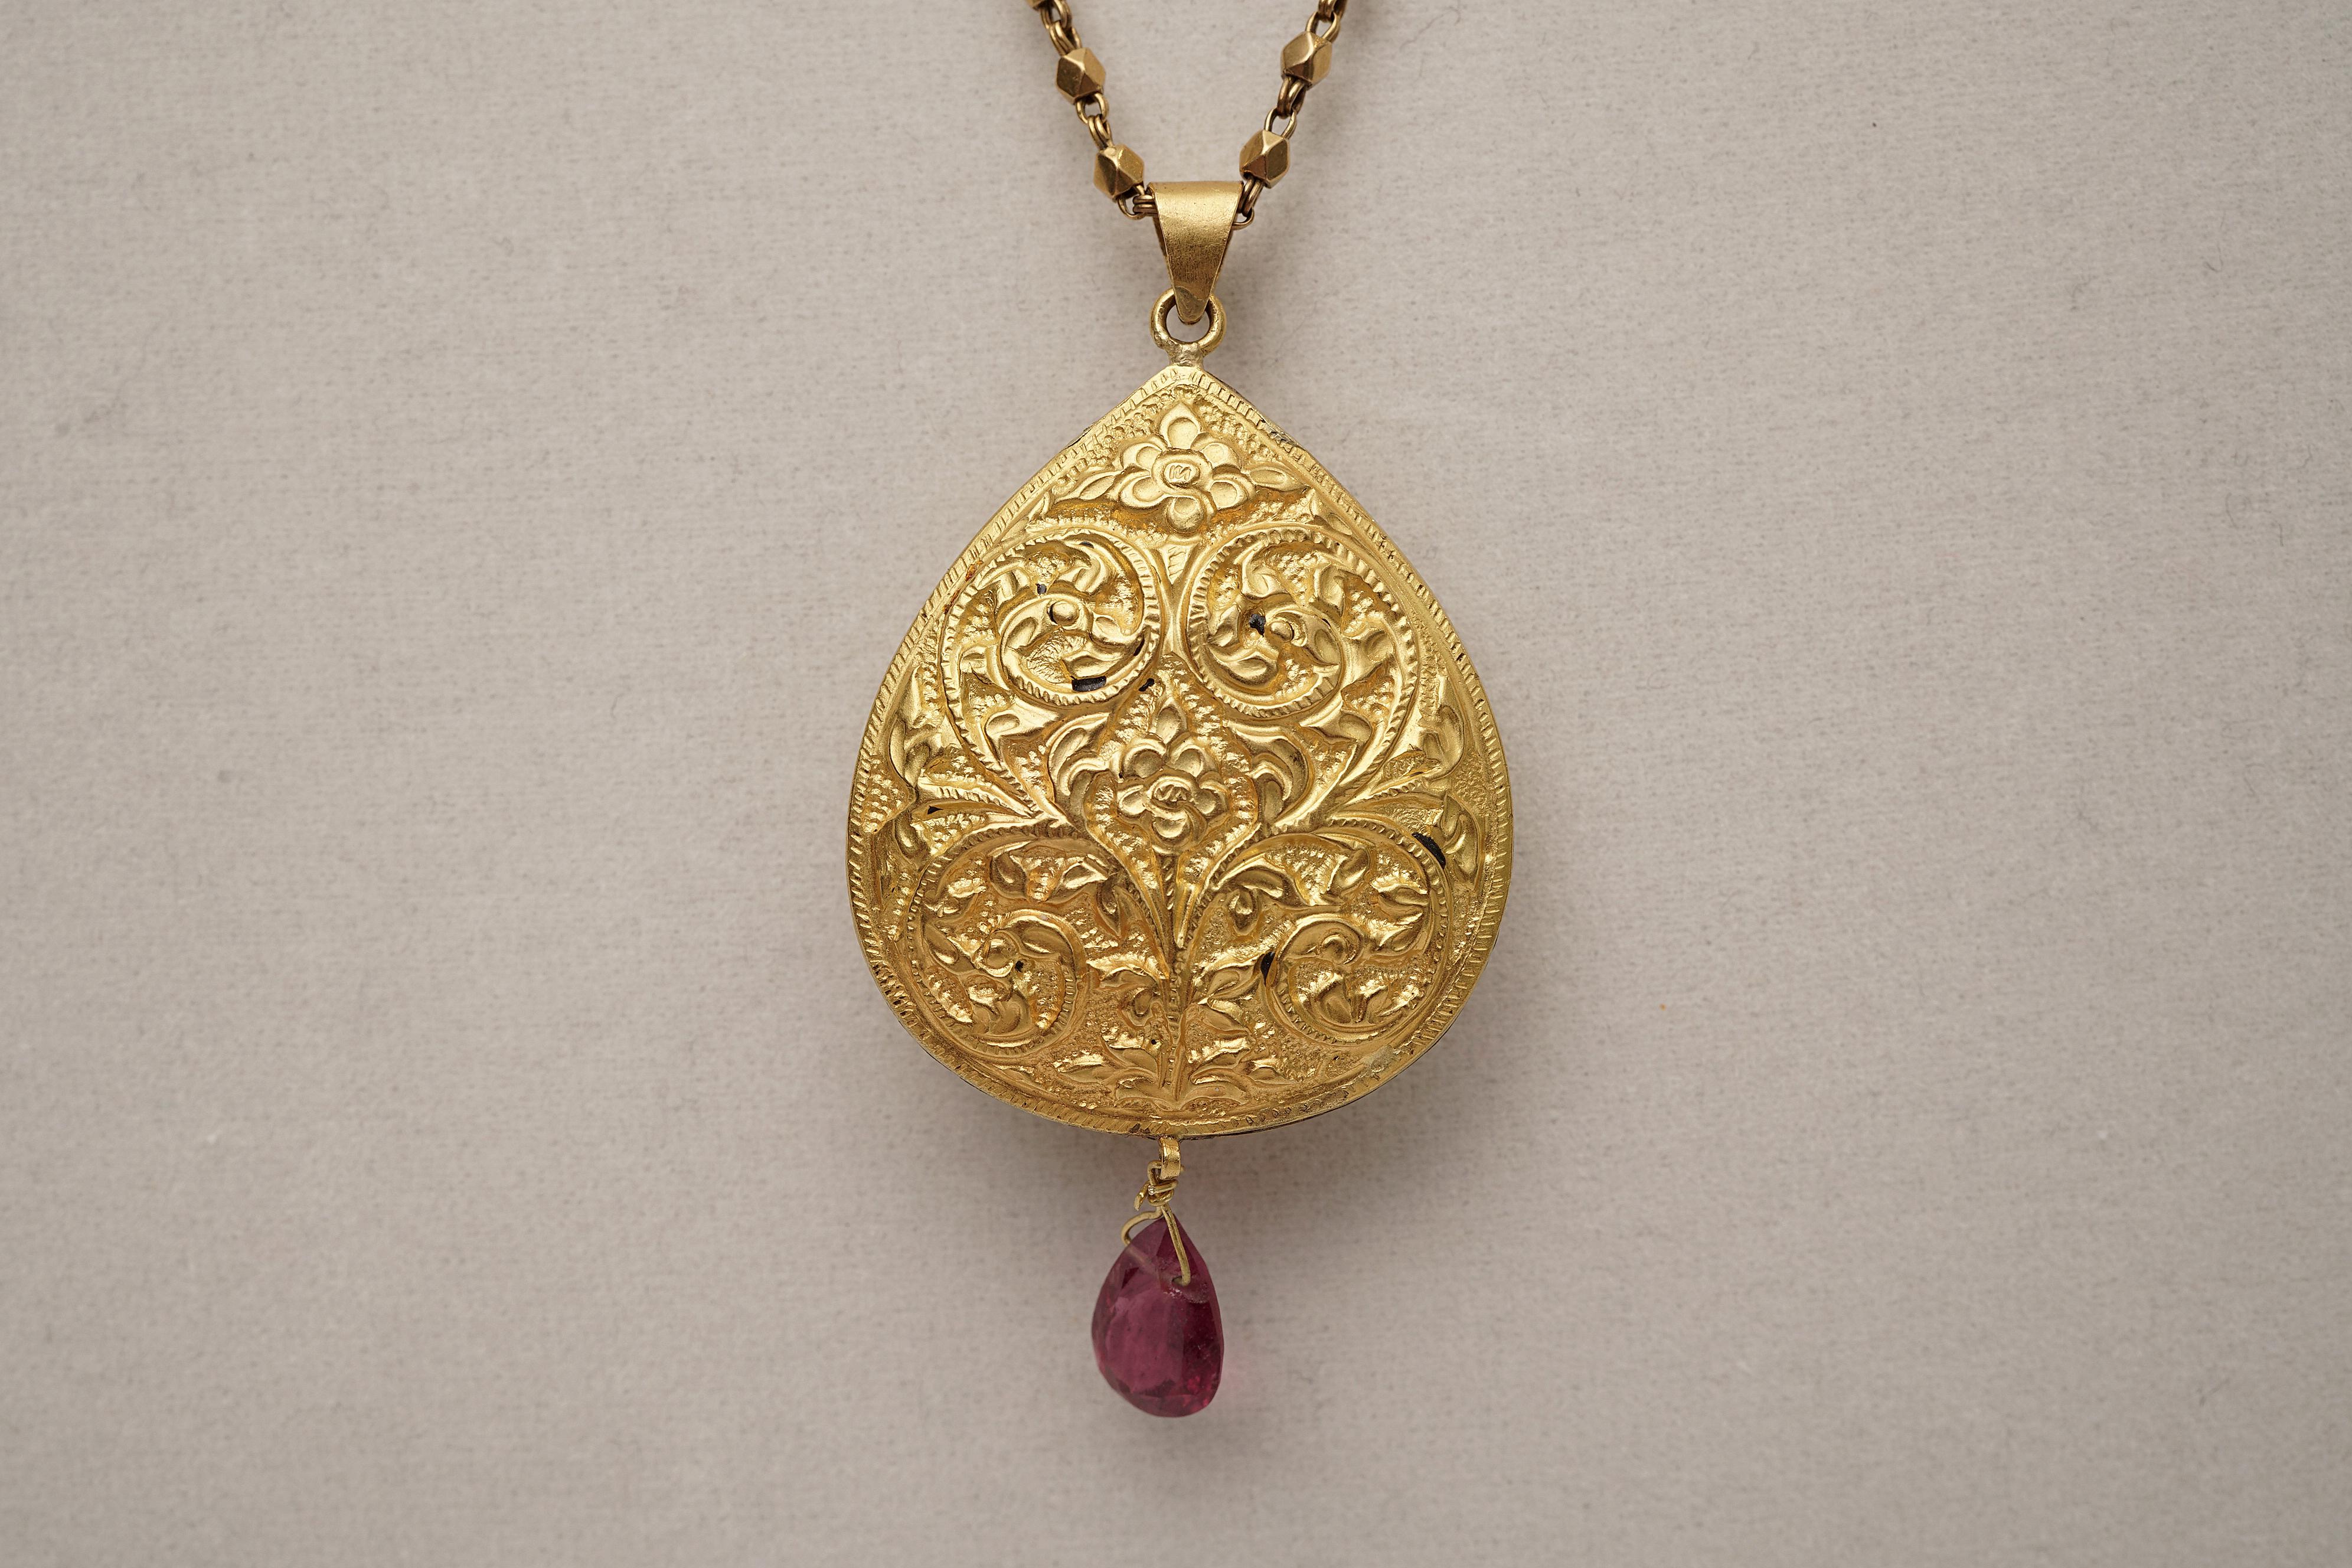 Lovely, dimensional 22K gold pendant with rose cut diamonds and pear-shaped, faceted pink tourmaline at center as well as the drop.  Fine hand-tooling work on both sides of the pendant, making it reversible.  Pendant suspends from a long beaded gold